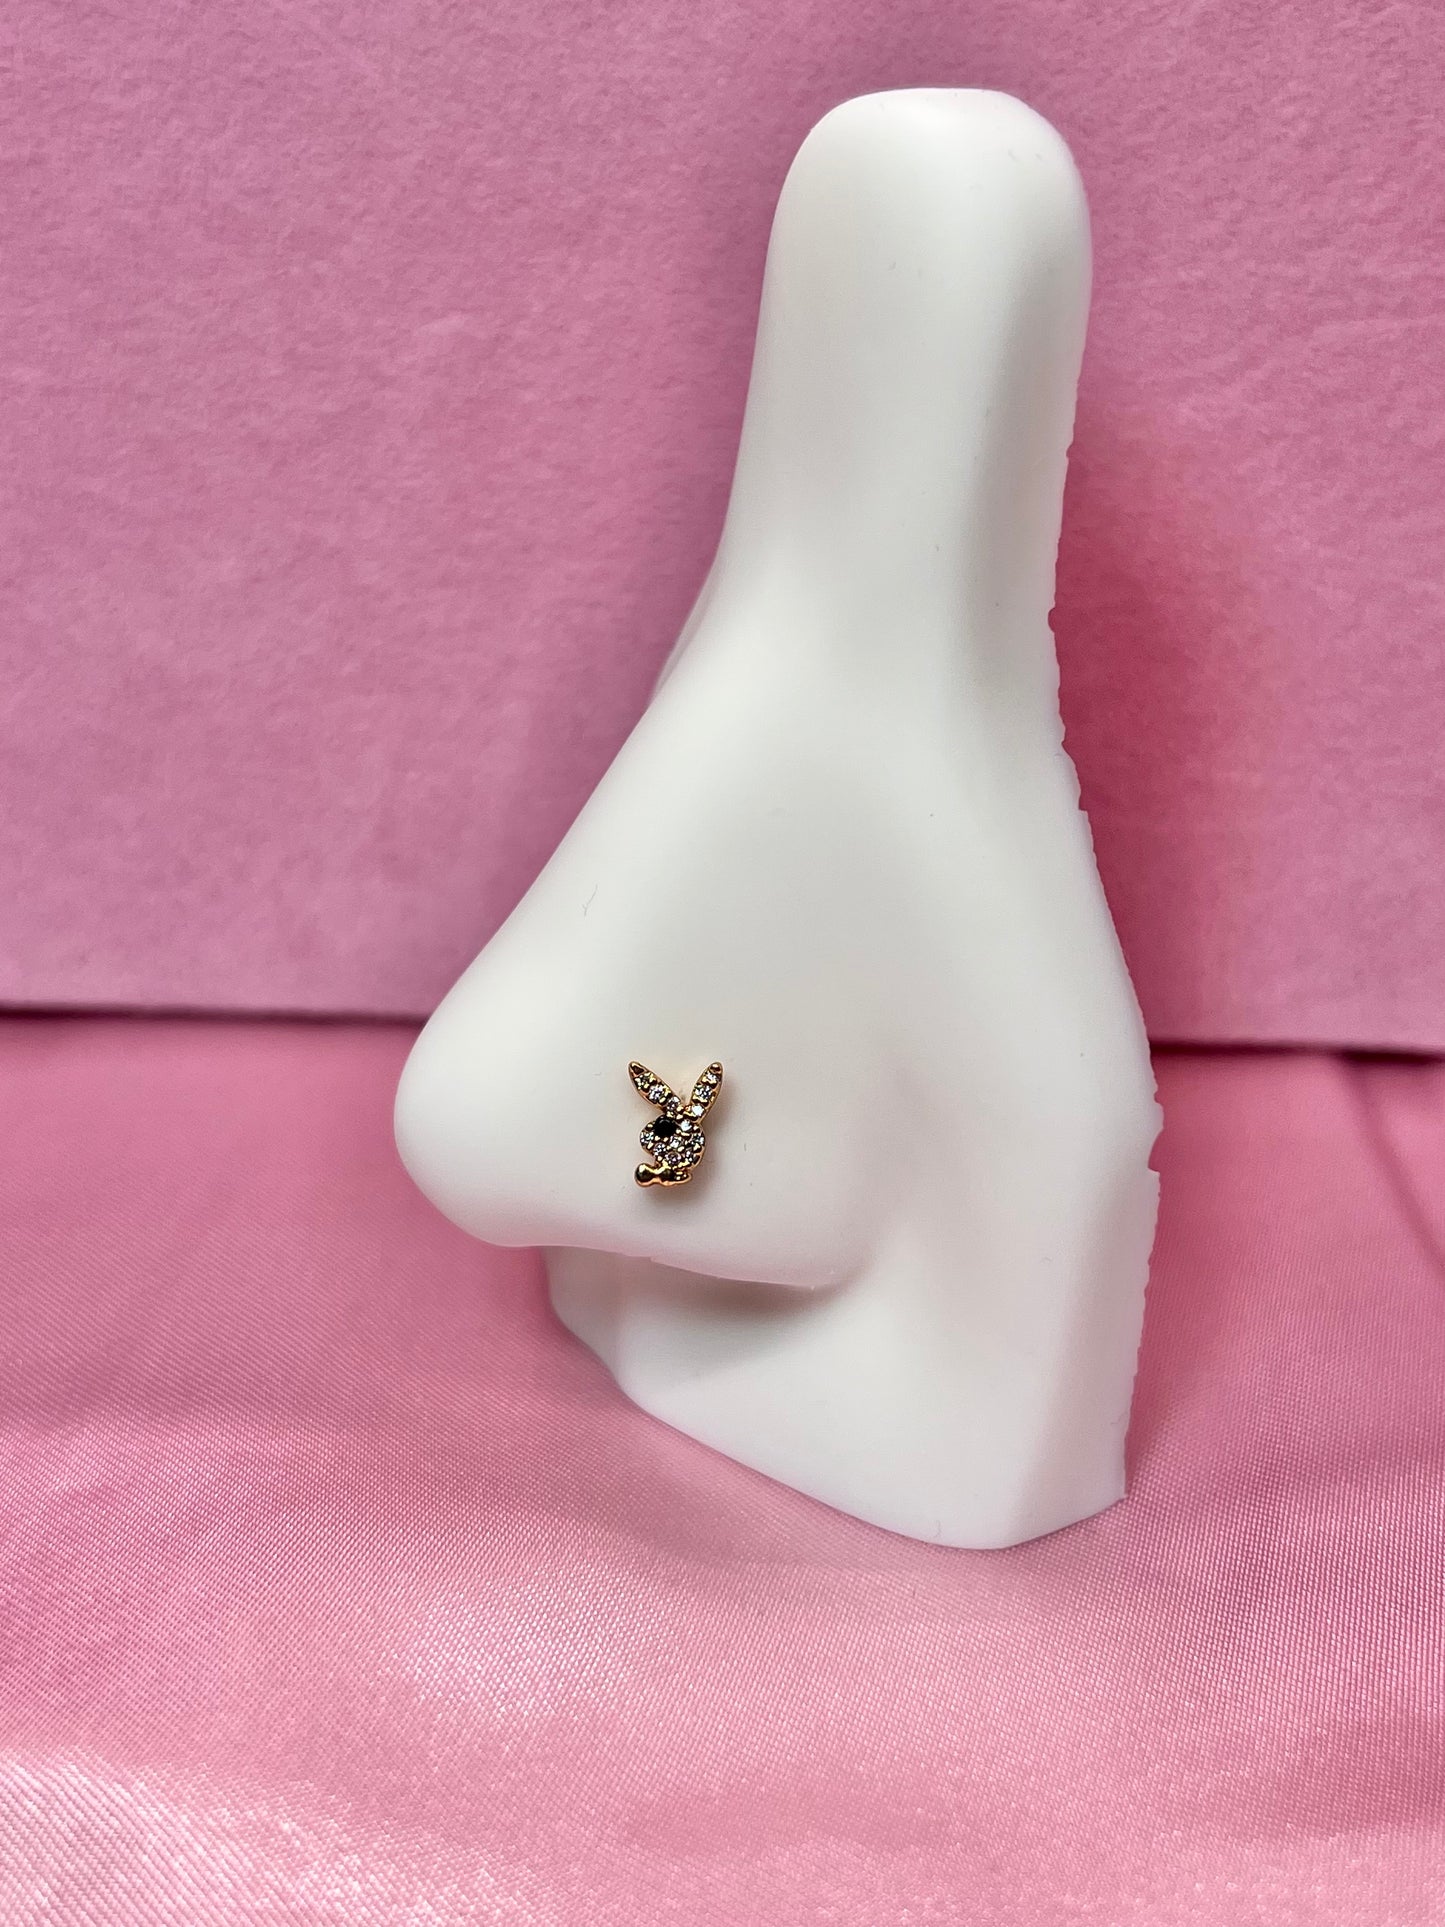 Icy bunny nose ring